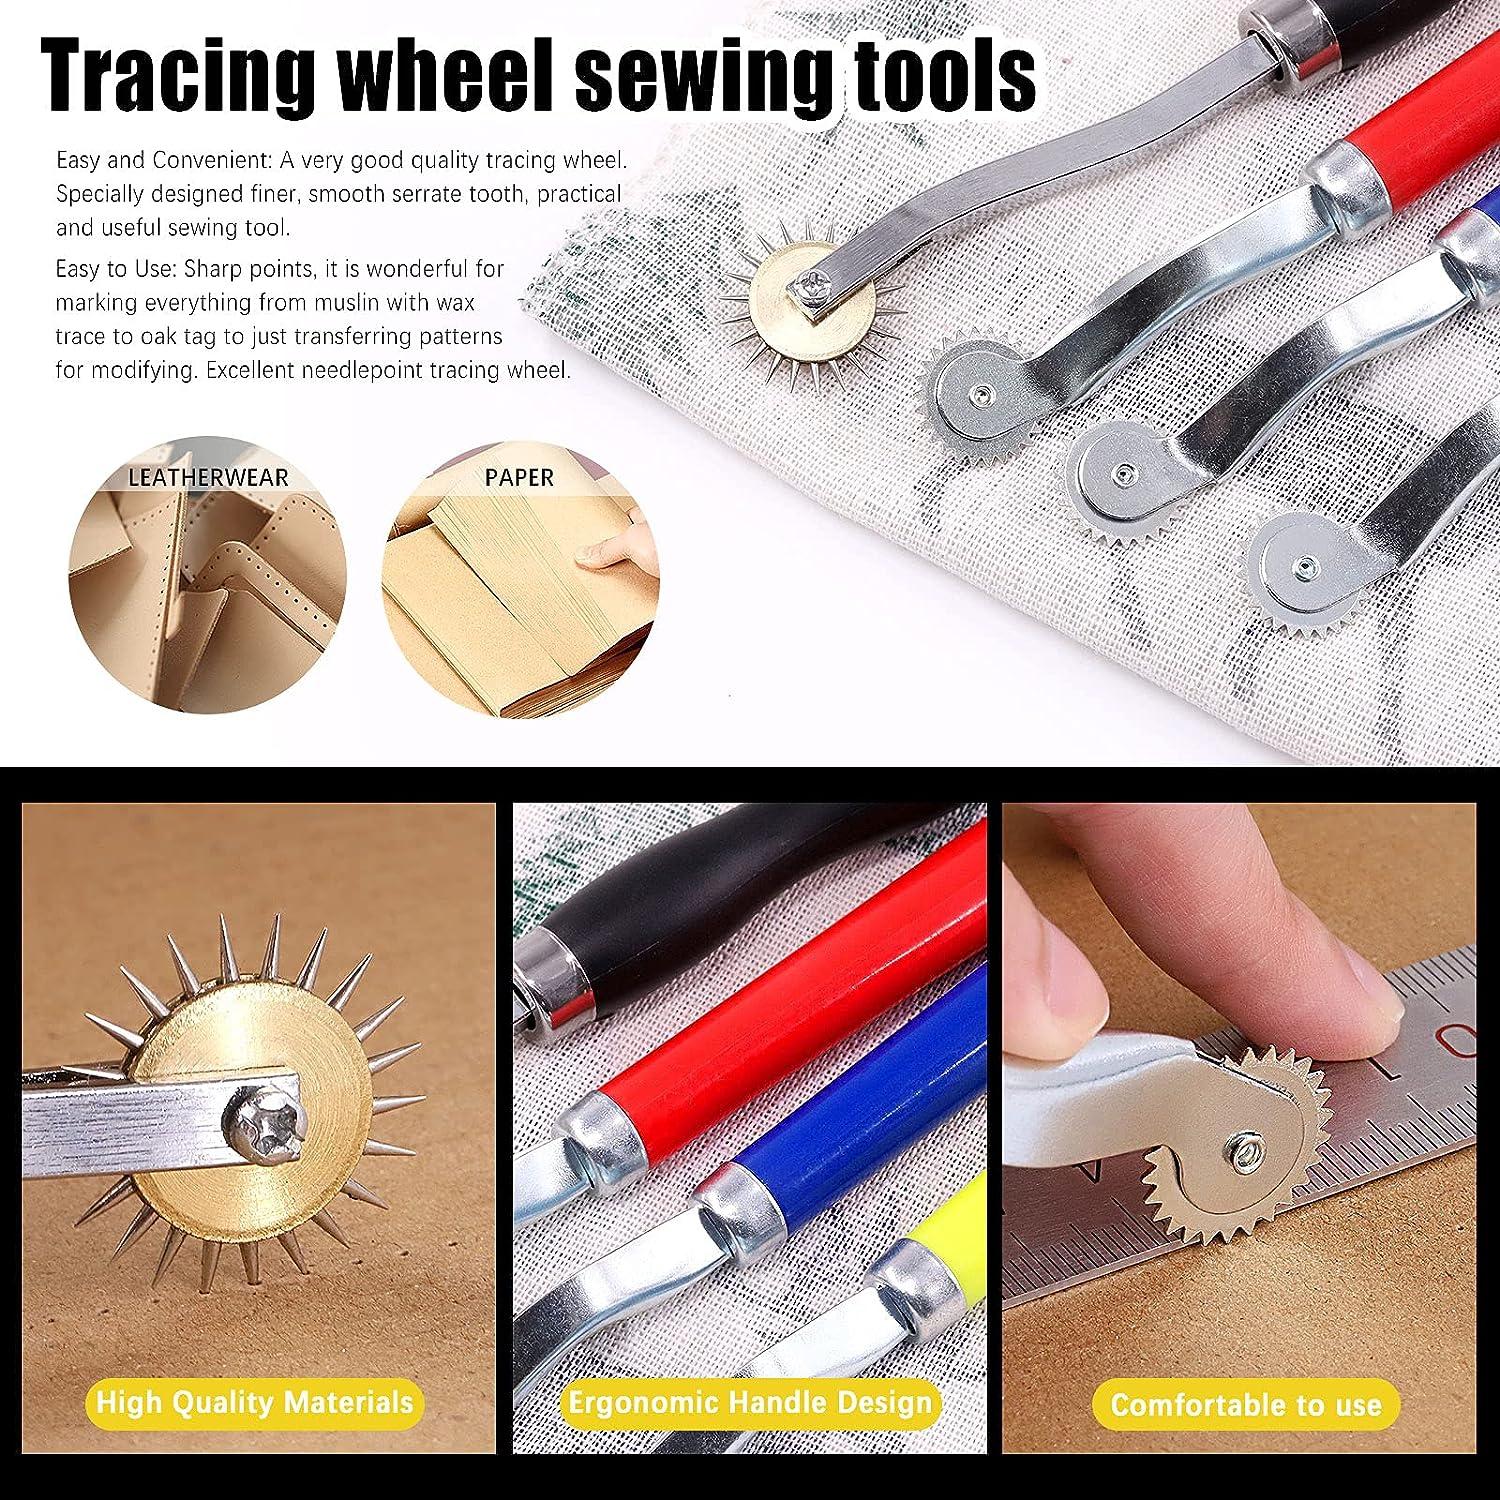 Mardatt 8Pcs Professional Leather Sewing Tools Kit with Tracing Wheels,  Stainless Steel Pattern Notcher, Scratch Awl, Tailors Chalk, Soft Measuring  Tape for Leather Tailor Paper Cloth Sewing